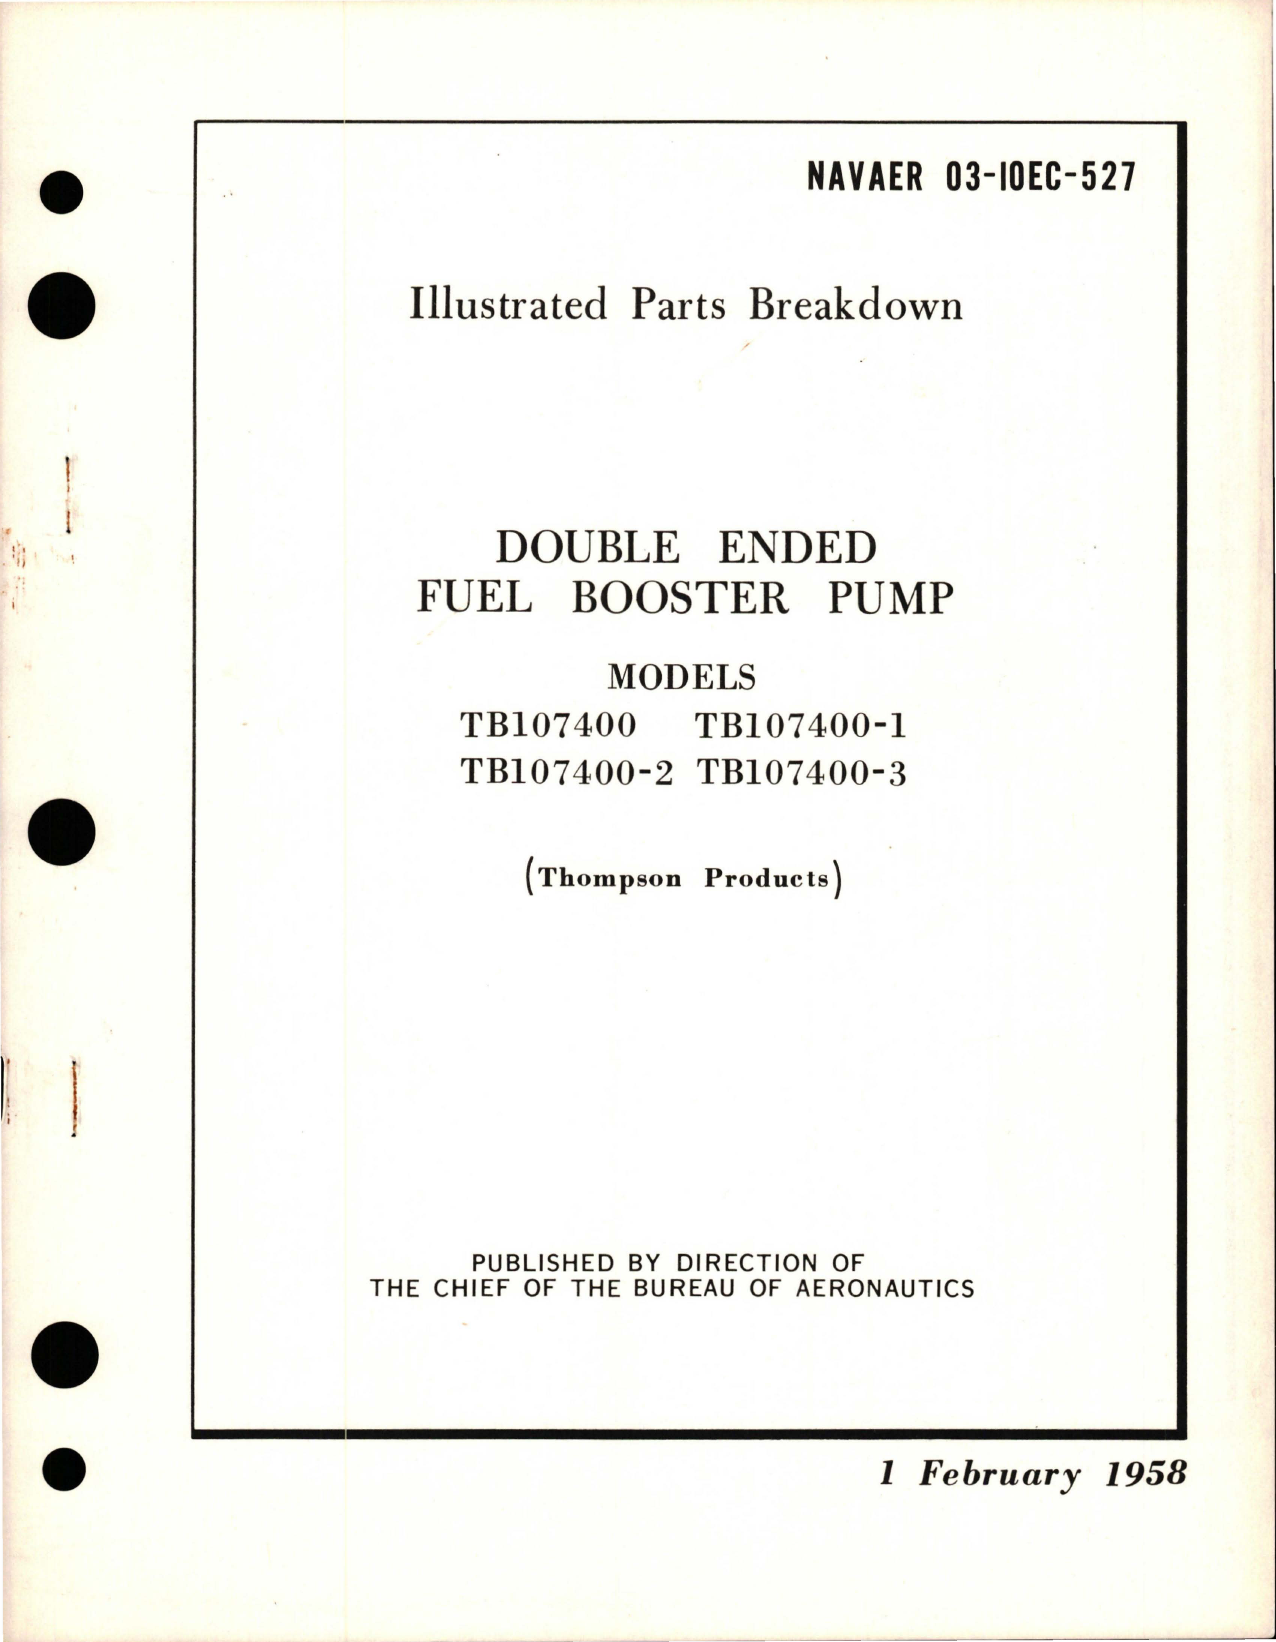 Sample page 1 from AirCorps Library document: Illustrated Parts Breakdown for Double Ended Fuel Booster Pump - TB107400, TB107400-1, TB107400-2, and TB107400-3